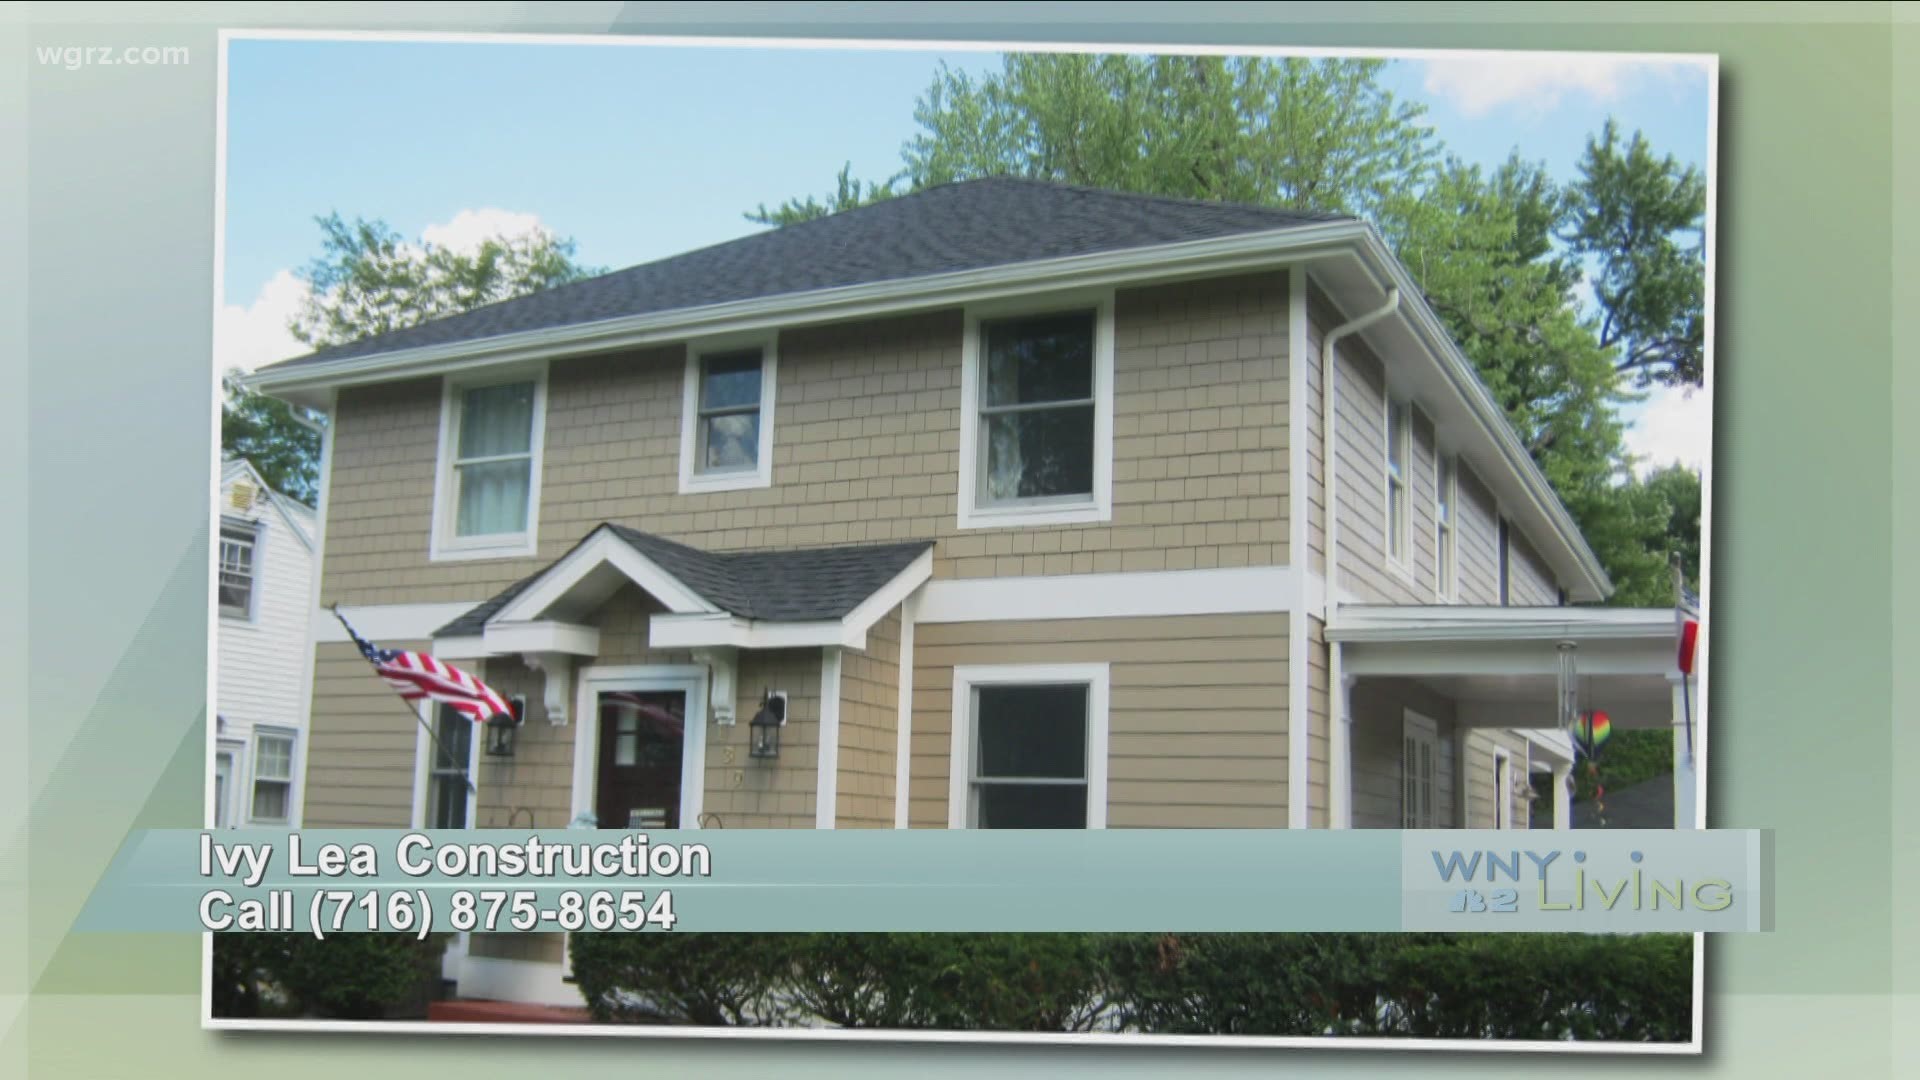 WNY Living - February 20 - Ivy Lea Construction (THIS VIDEO IS SPONSORED BY IVY LEA CONSTRUCTION)